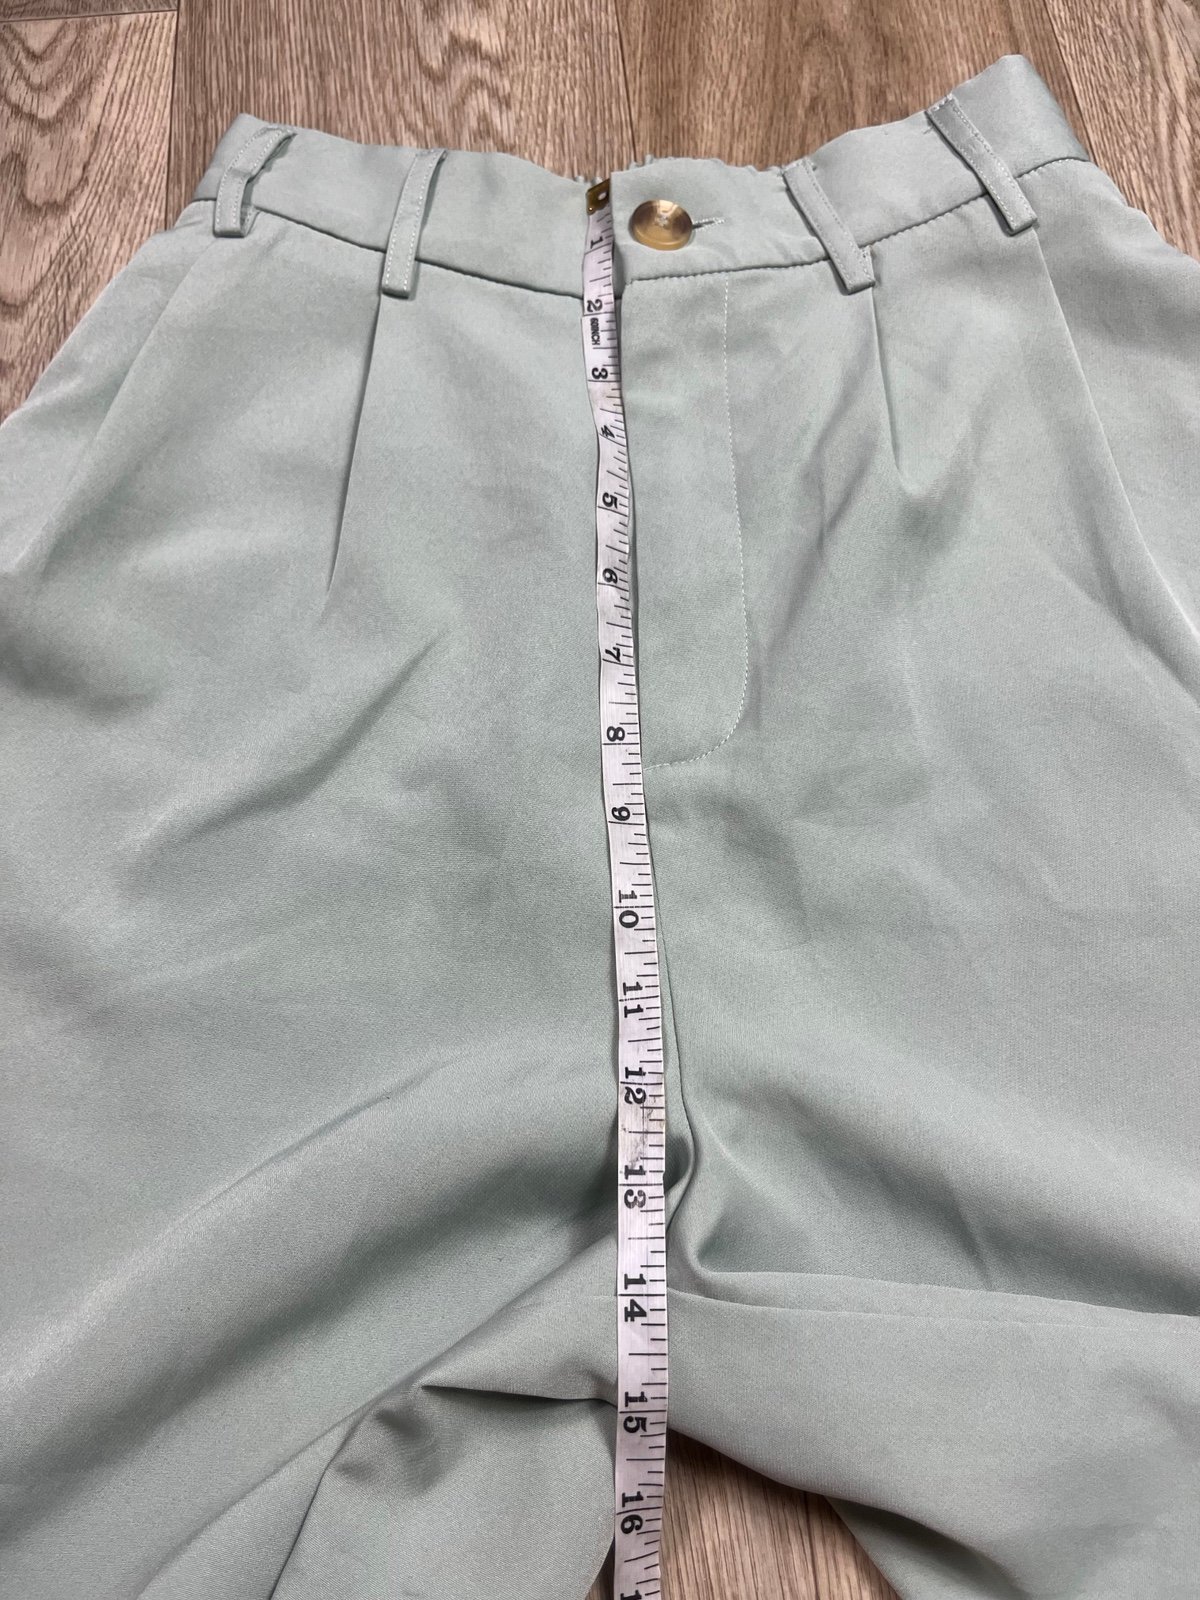 Discounted Forever 21 High waisted Pleated shorts sage green size small lOmKQGPzW best sale